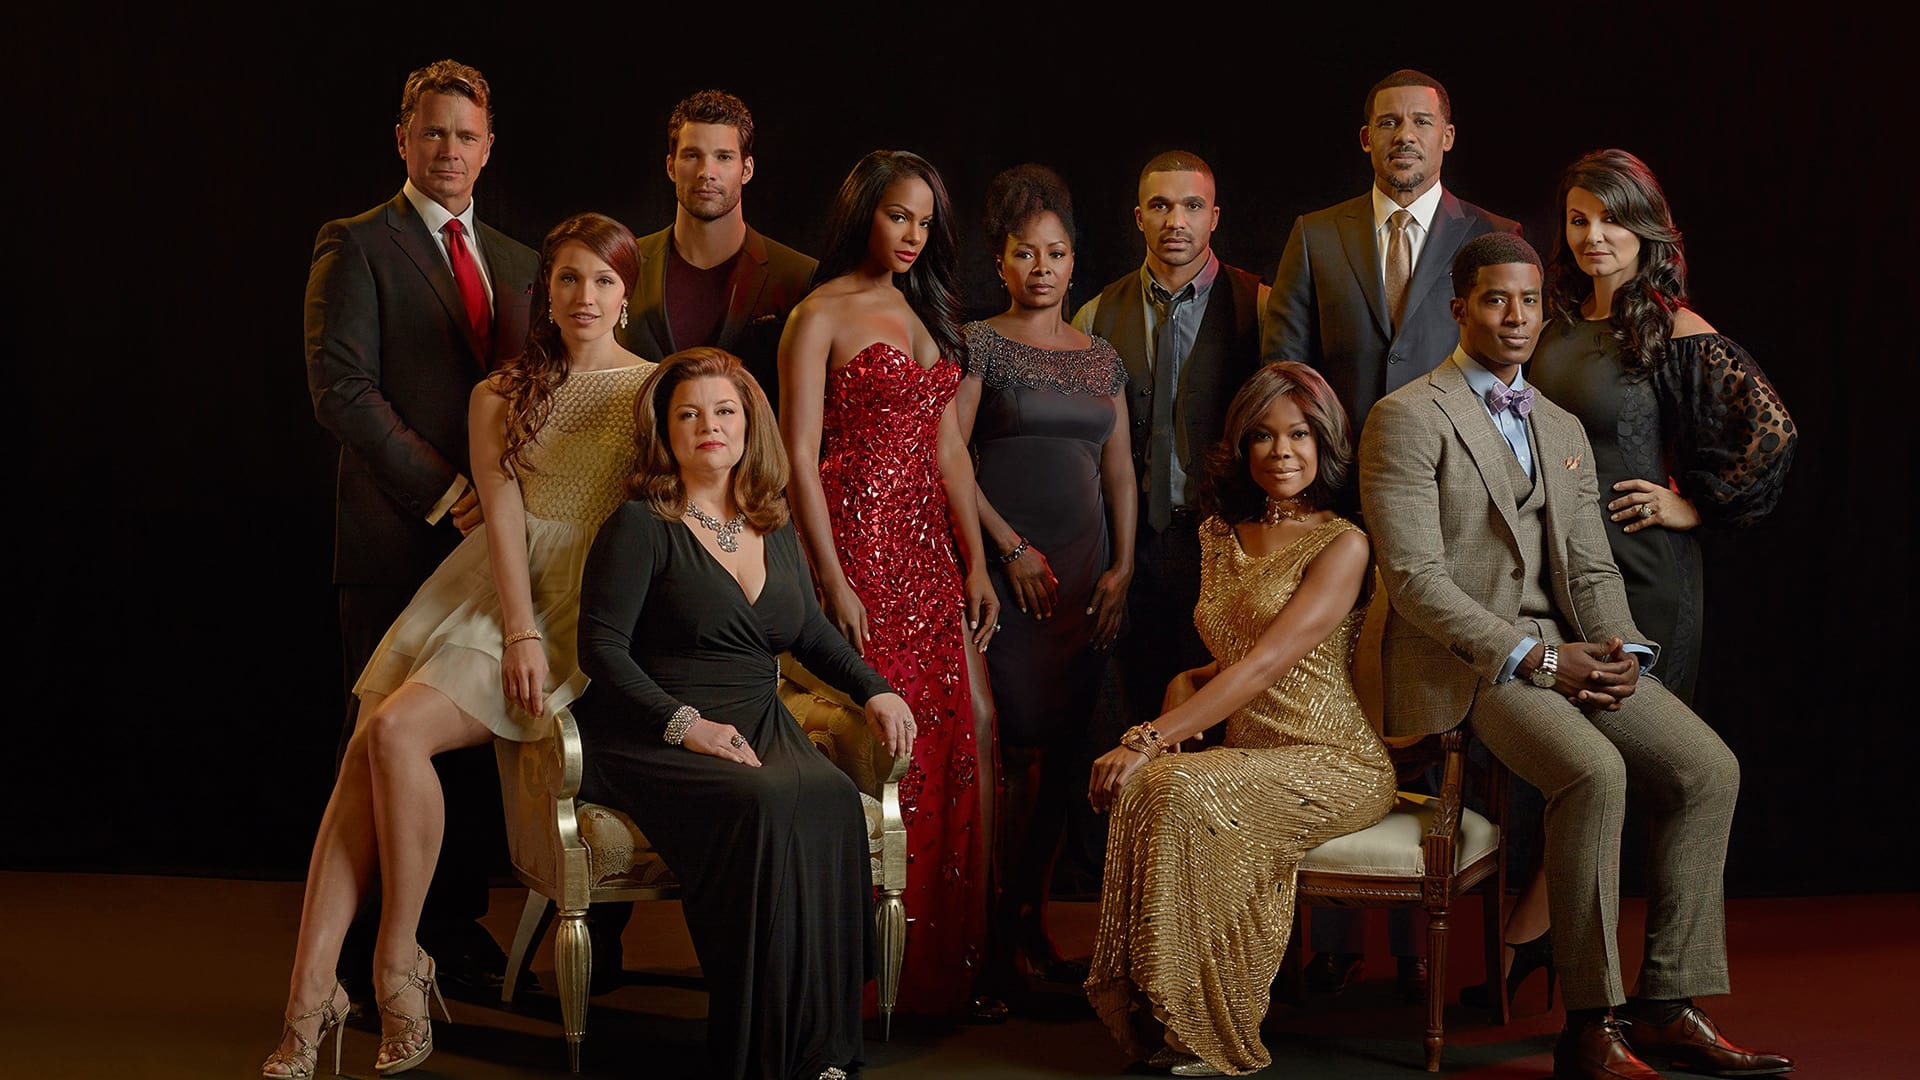 Tyler Perry's The Haves and the Have Nots - Season 8 Episode 16